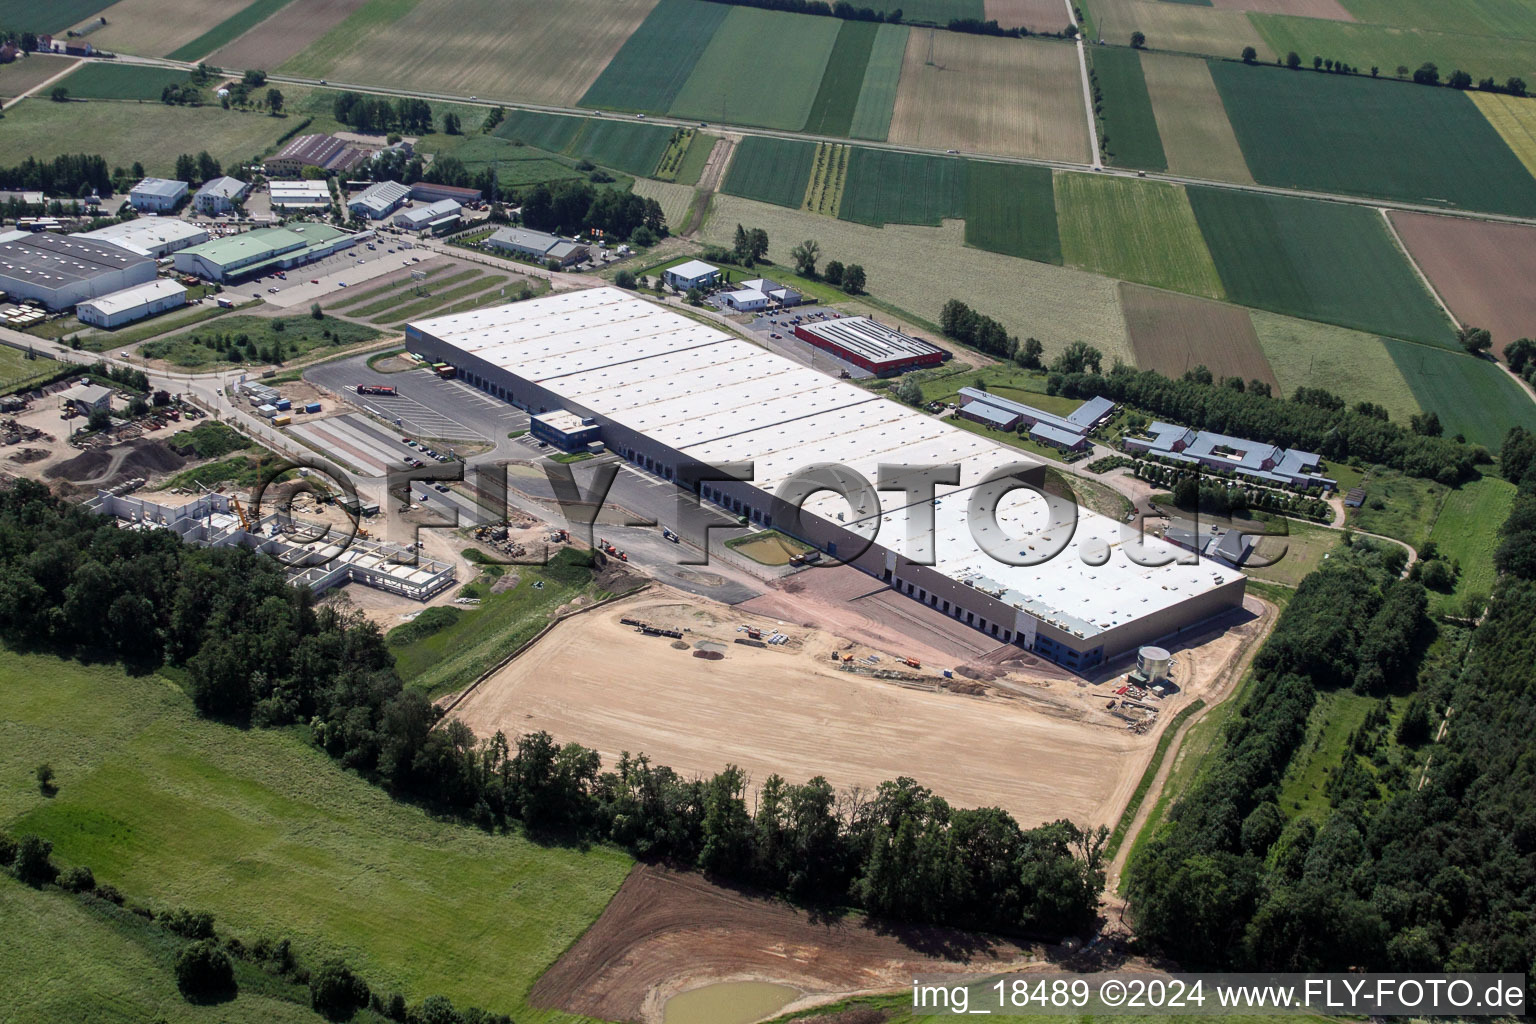 Oblique view of New building construction site in the industrial park Horst for Friedrich Zufall GmbH & Co. KG Internationale Spedition in the district Gewerbegebiet Horst in Kandel in the state Rhineland-Palatinate, Germany